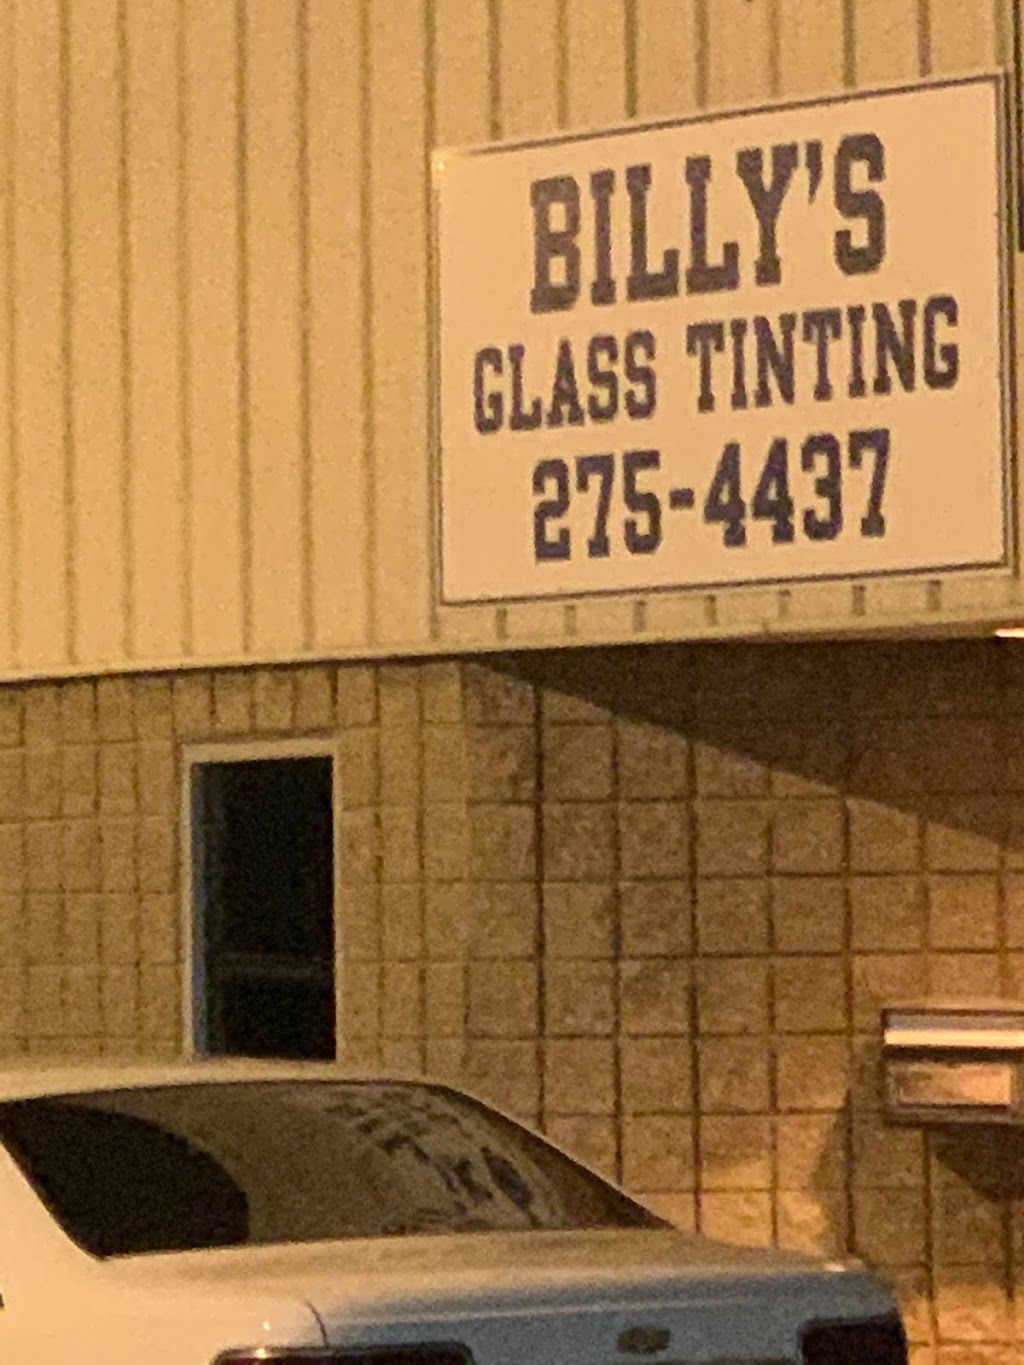 Billys Glass Tinting | 3607 Downing Dr, Wilmington, DE 19802 | Phone: (302) 275-4437